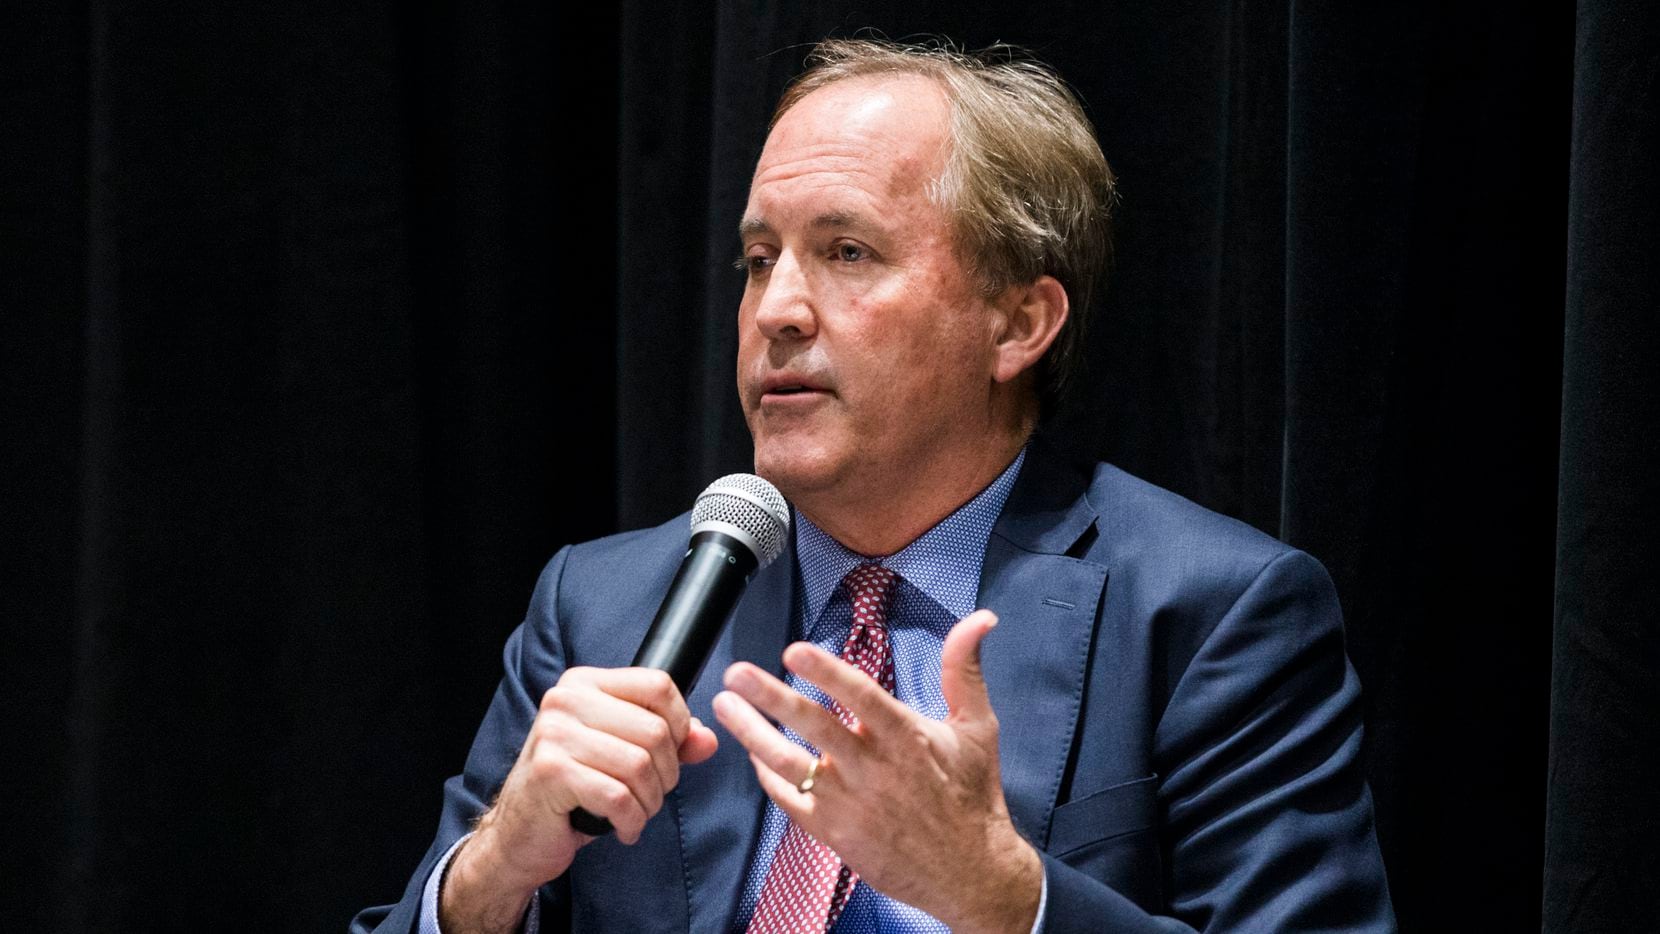 Texas Attorney General Ken Paxton is shown here at an appearance with The Dallas Morning News Vice President and Editor of Editorials Brandan Miniter, U.S. Attorney Erin Newly Cox, and Trafficking Institute CEO Victor Boutros on Wednesday, February 26, 2020 at The Dallas Morning News Auditorium in Dallas. Paxton, who was indicted in 2015, has been pulled into another securities fraud case involving two of his former businesses partners who are named complainants on his indictments. (Ashley Landis/The Dallas Morning News)